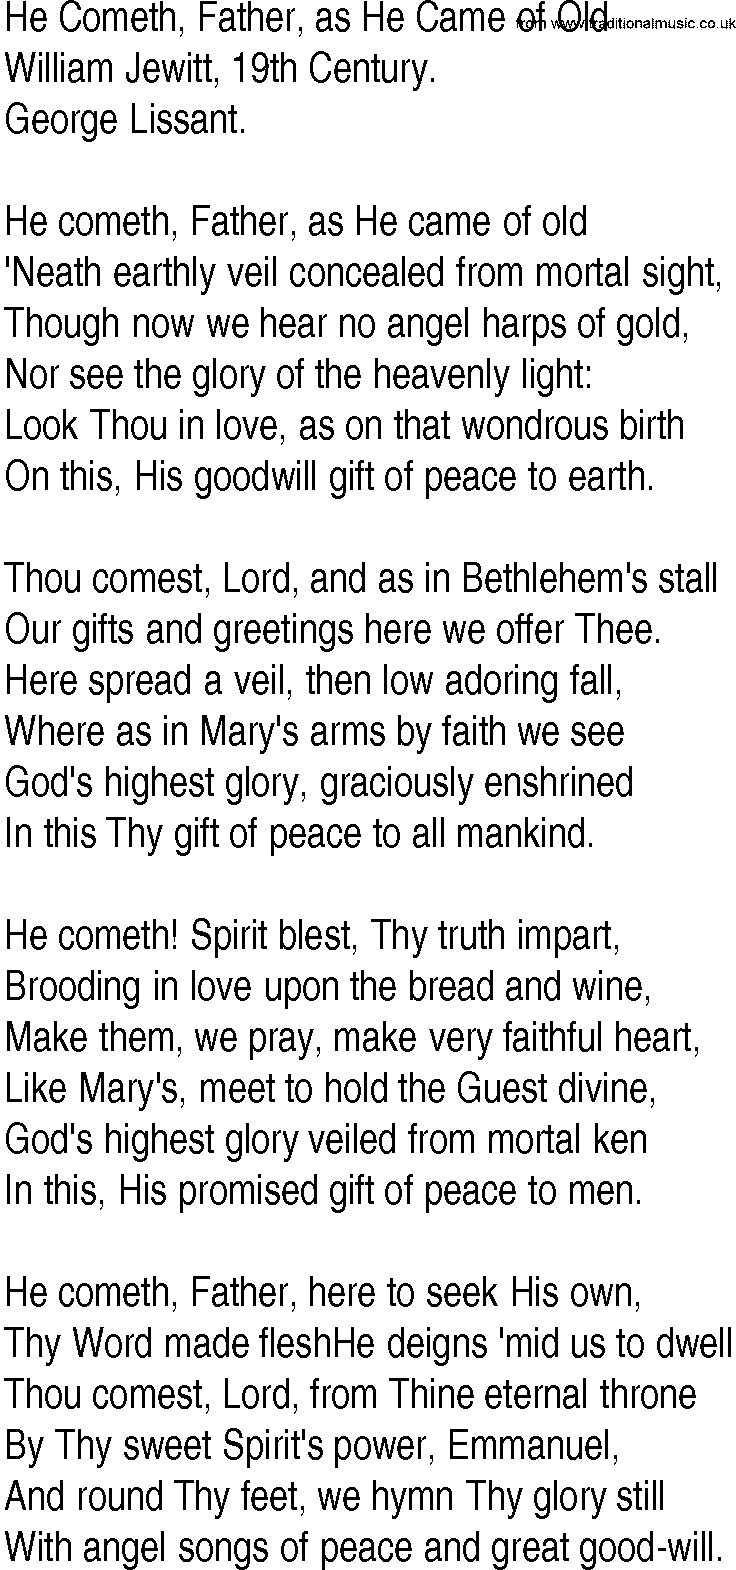 Hymn and Gospel Song: He Cometh, Father, as He Came of Old by William Jewitt th Century lyrics